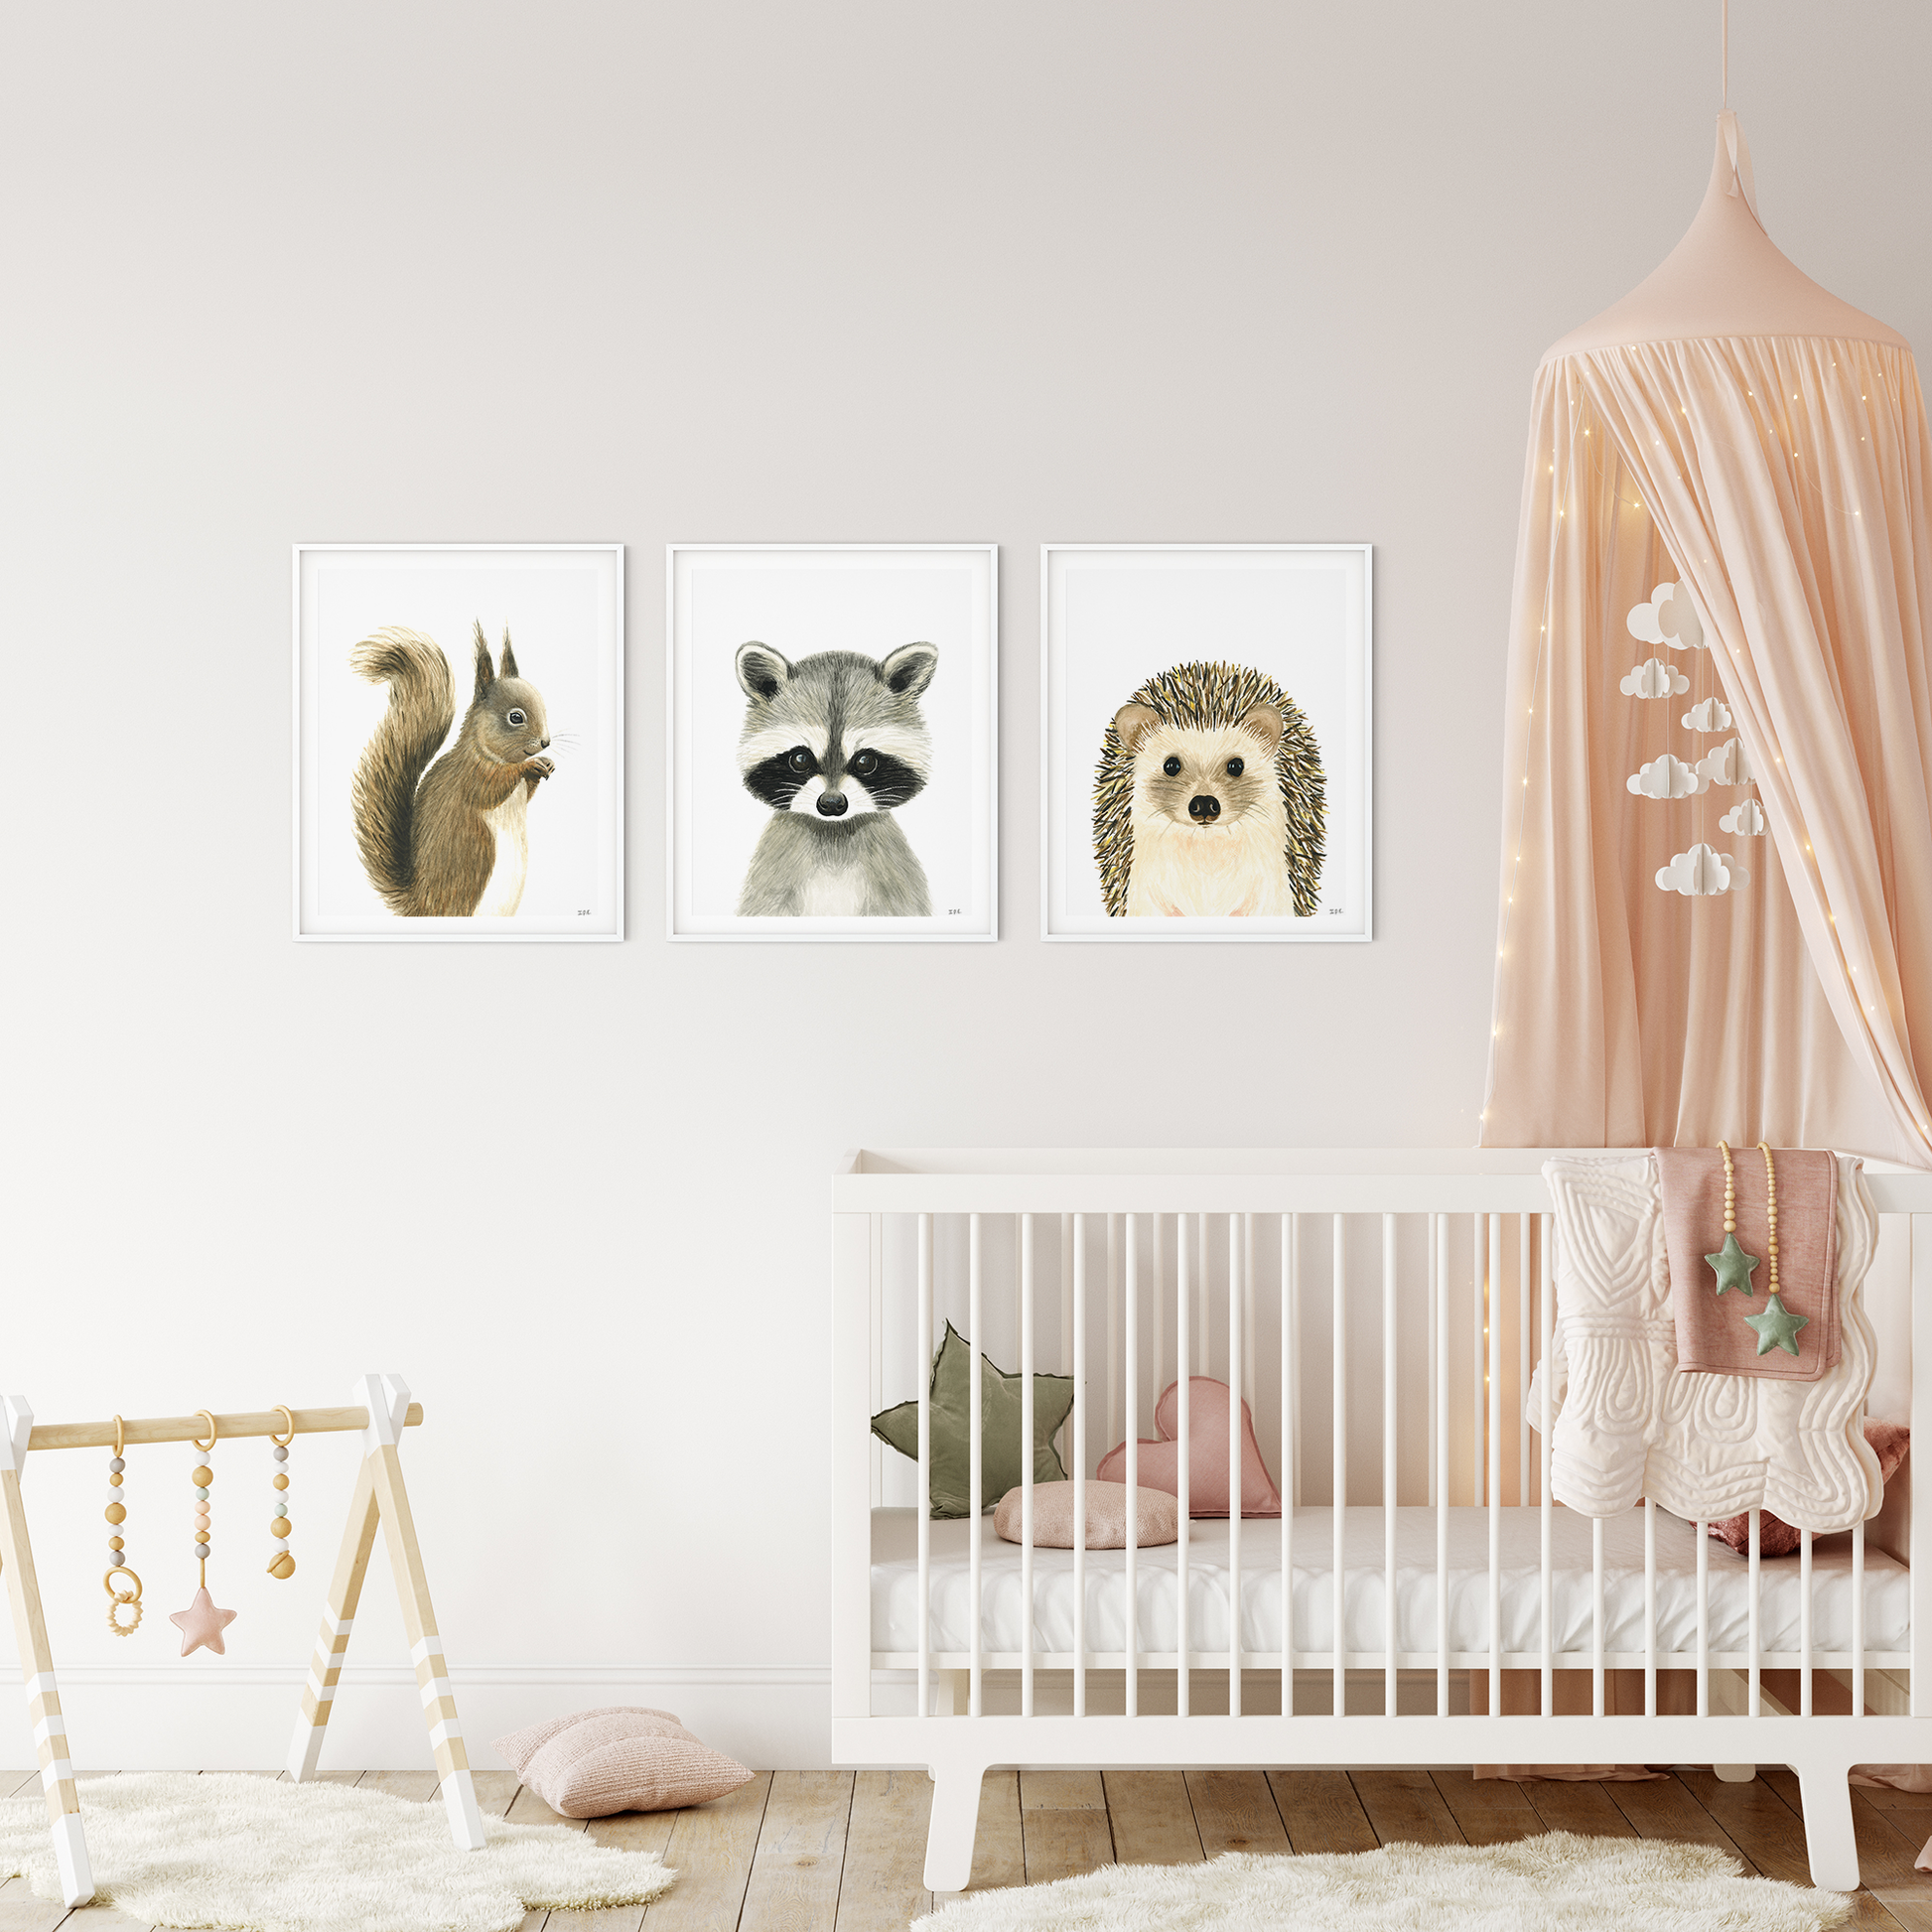 Set of 3 woodland animal prints in a babyroom with nursery decoration: squirrel, racoon and hedgehog